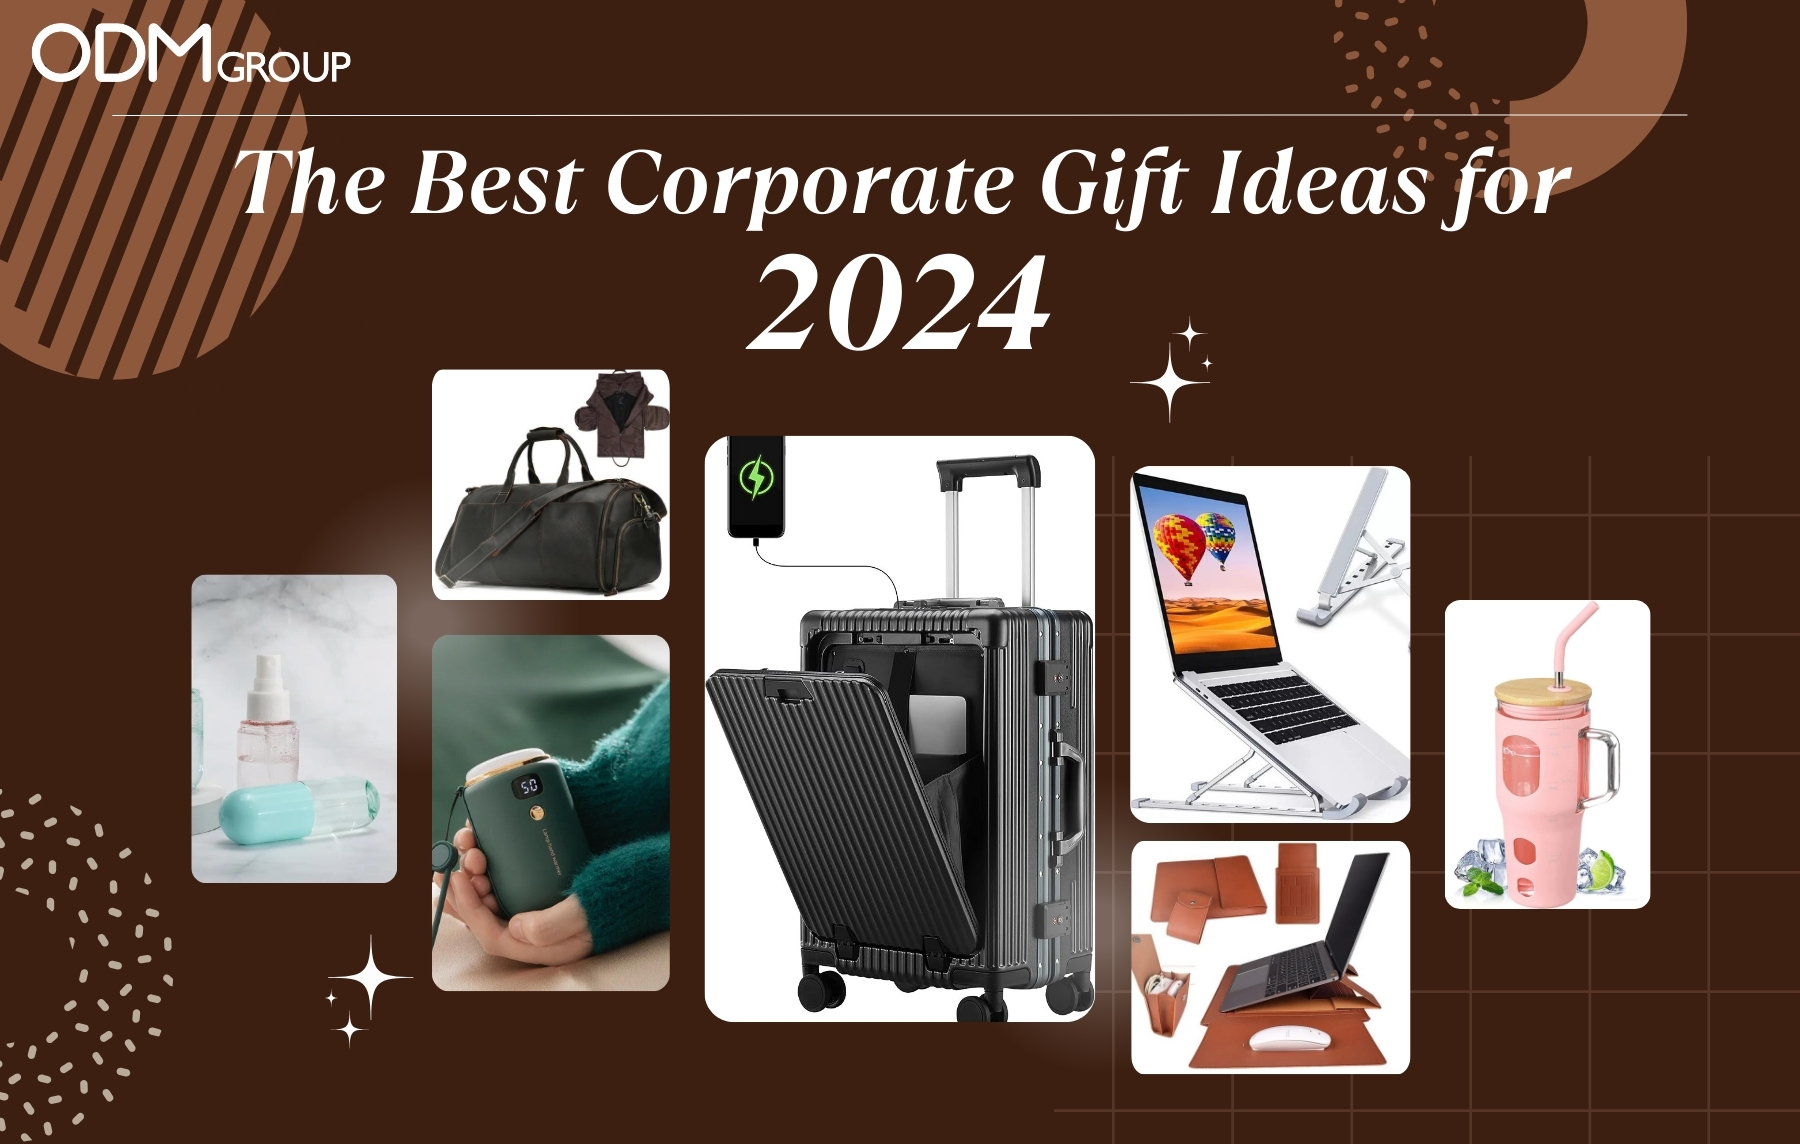 https://www.theodmgroup.com/wp-content/uploads/2022/12/Corporate-Gift-Ideas.jpg